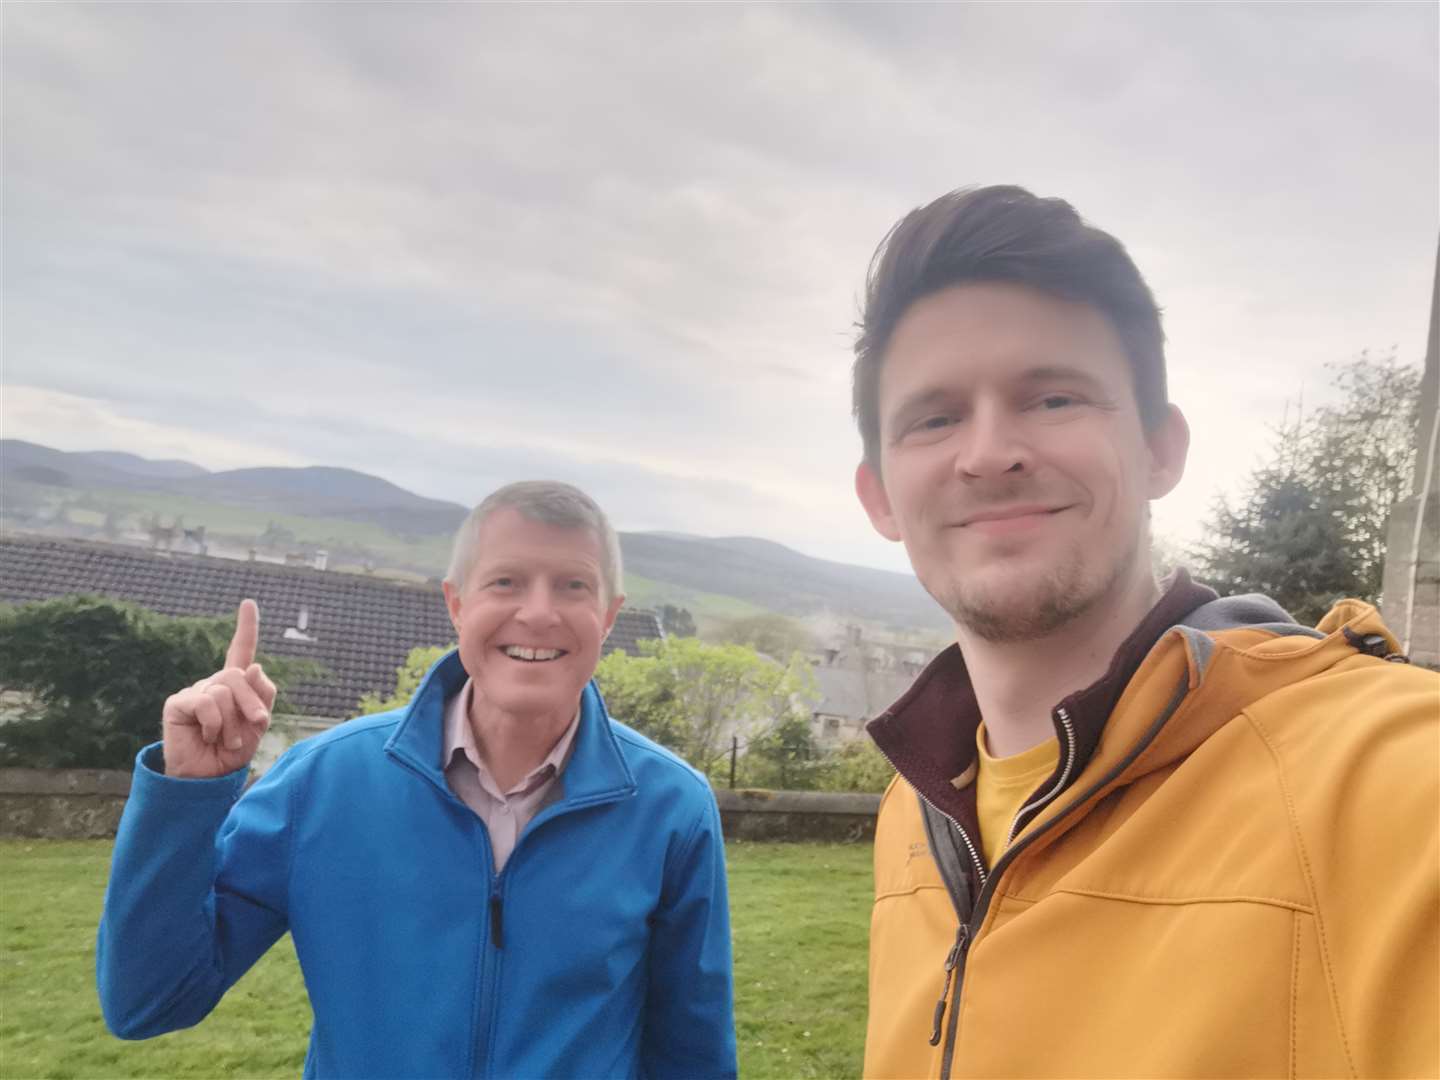 Scottish Lib Dems local candidate Declan Gallacher out with former Scottish party leader Willie Rennie meeting residents of East Terrace in Kingussie.